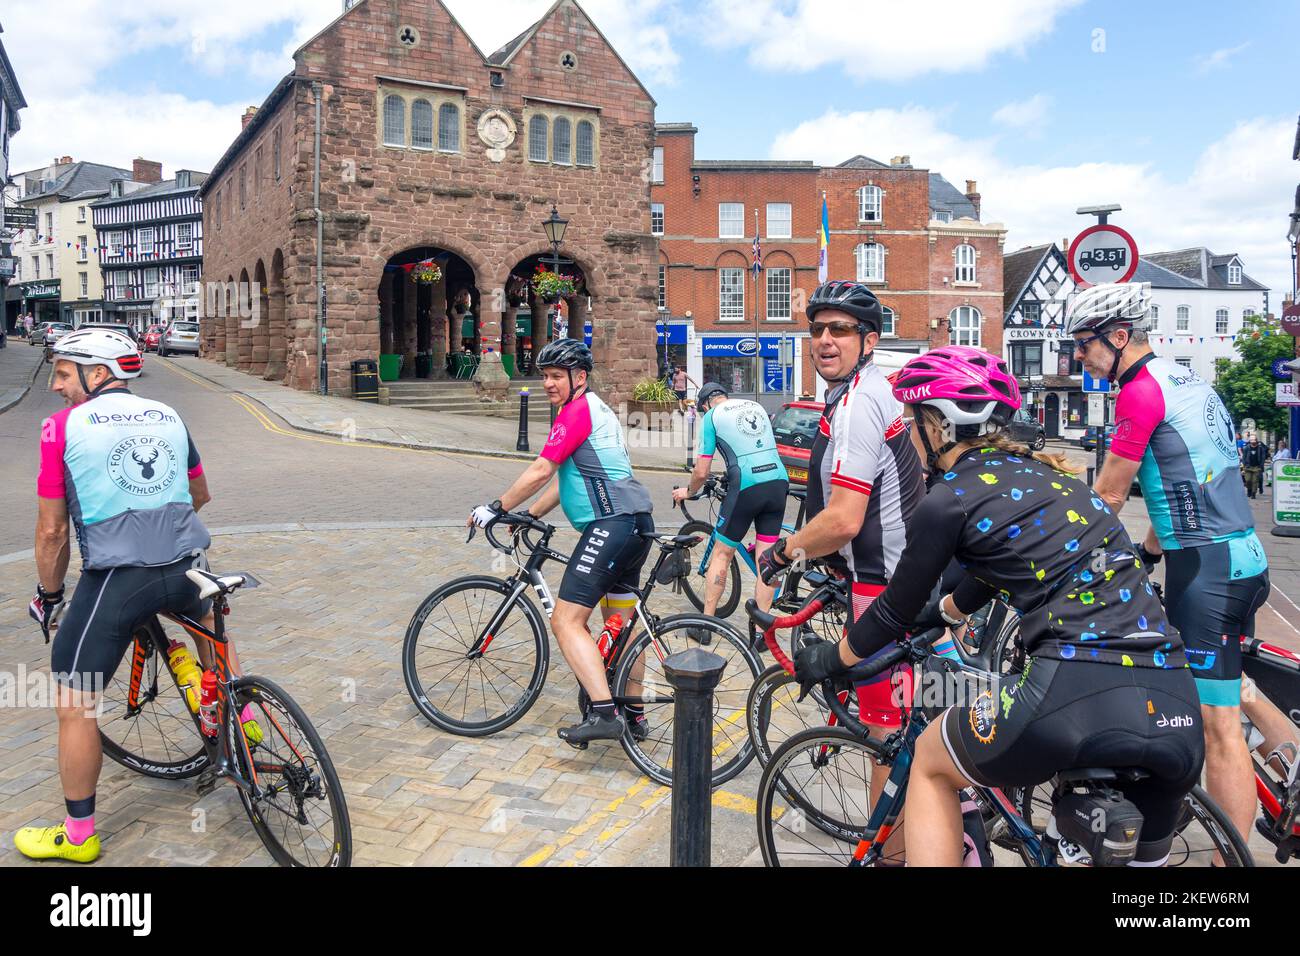 Gruppo di ciclisti in The Market Place, Ross-on-Wye (Rhosan ar Wy), Herefordshire, Inghilterra, Regno Unito Foto Stock